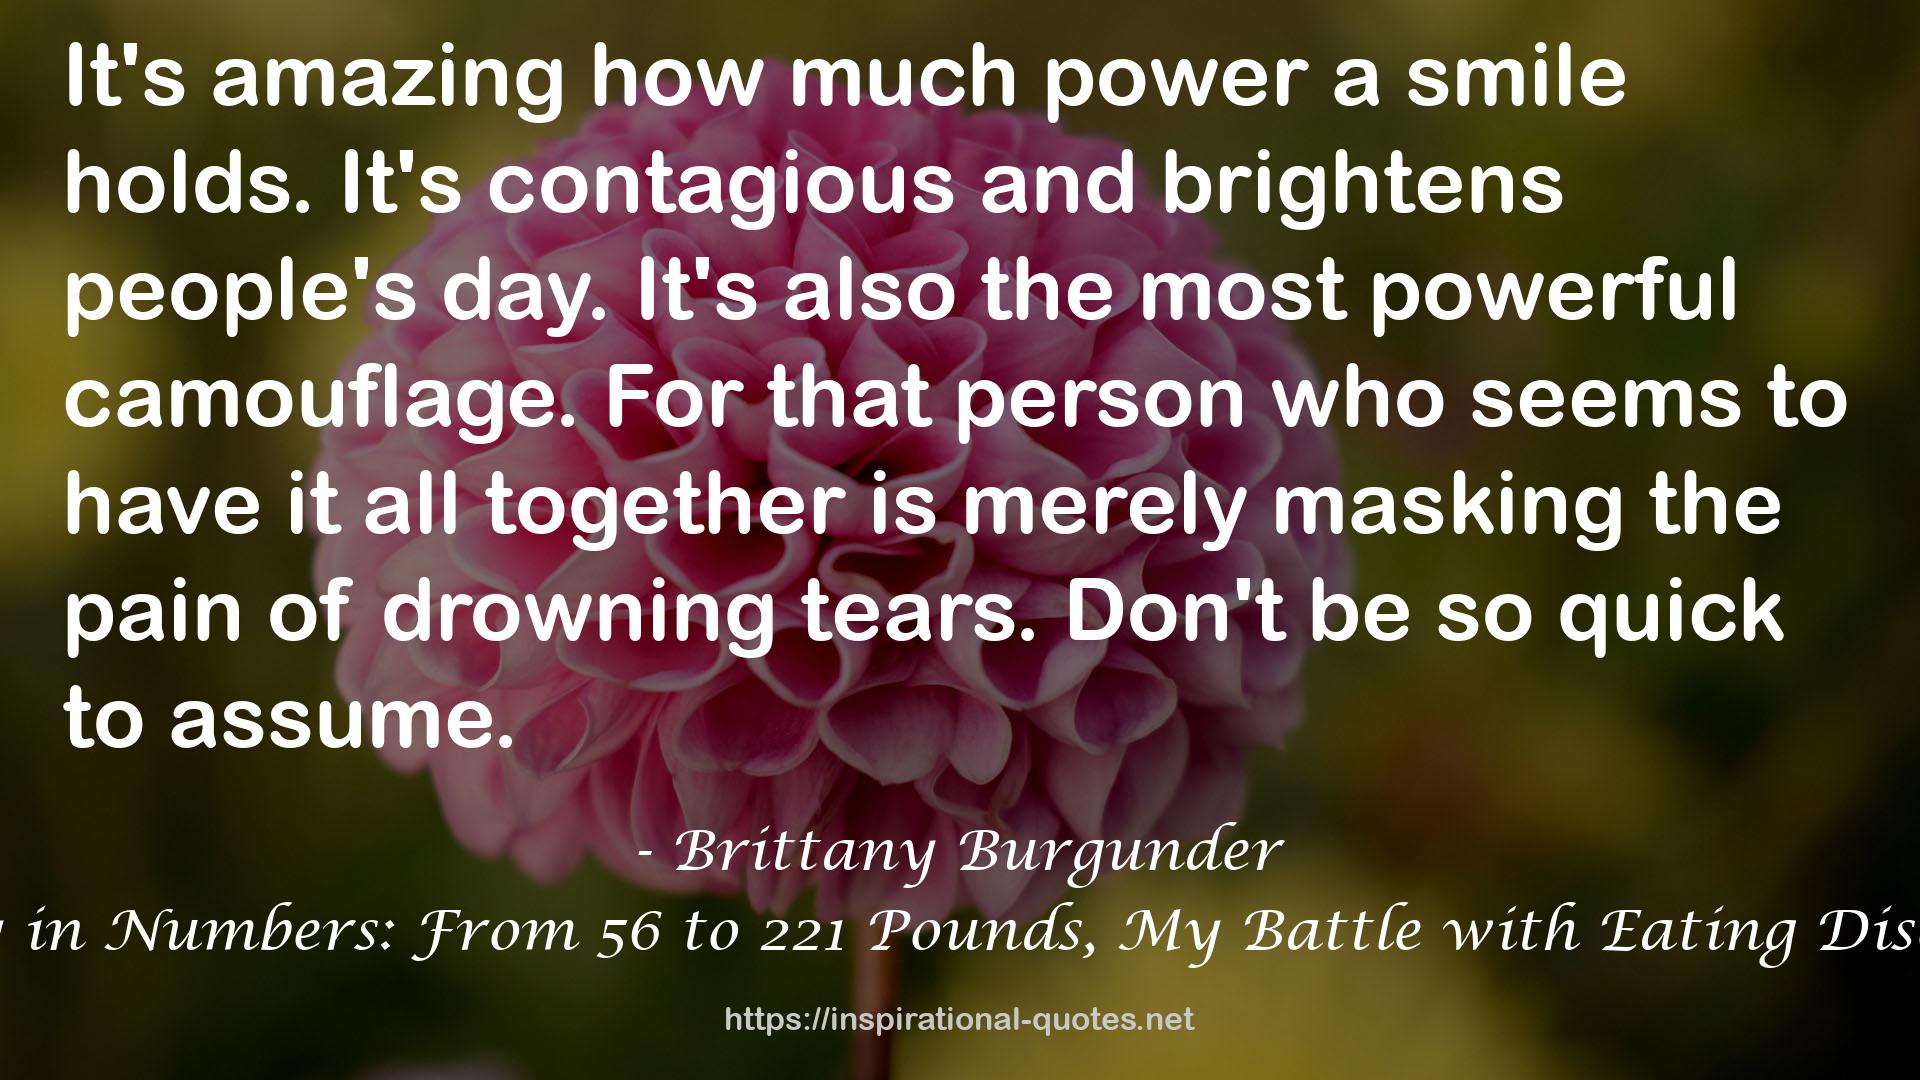 Brittany Burgunder QUOTES